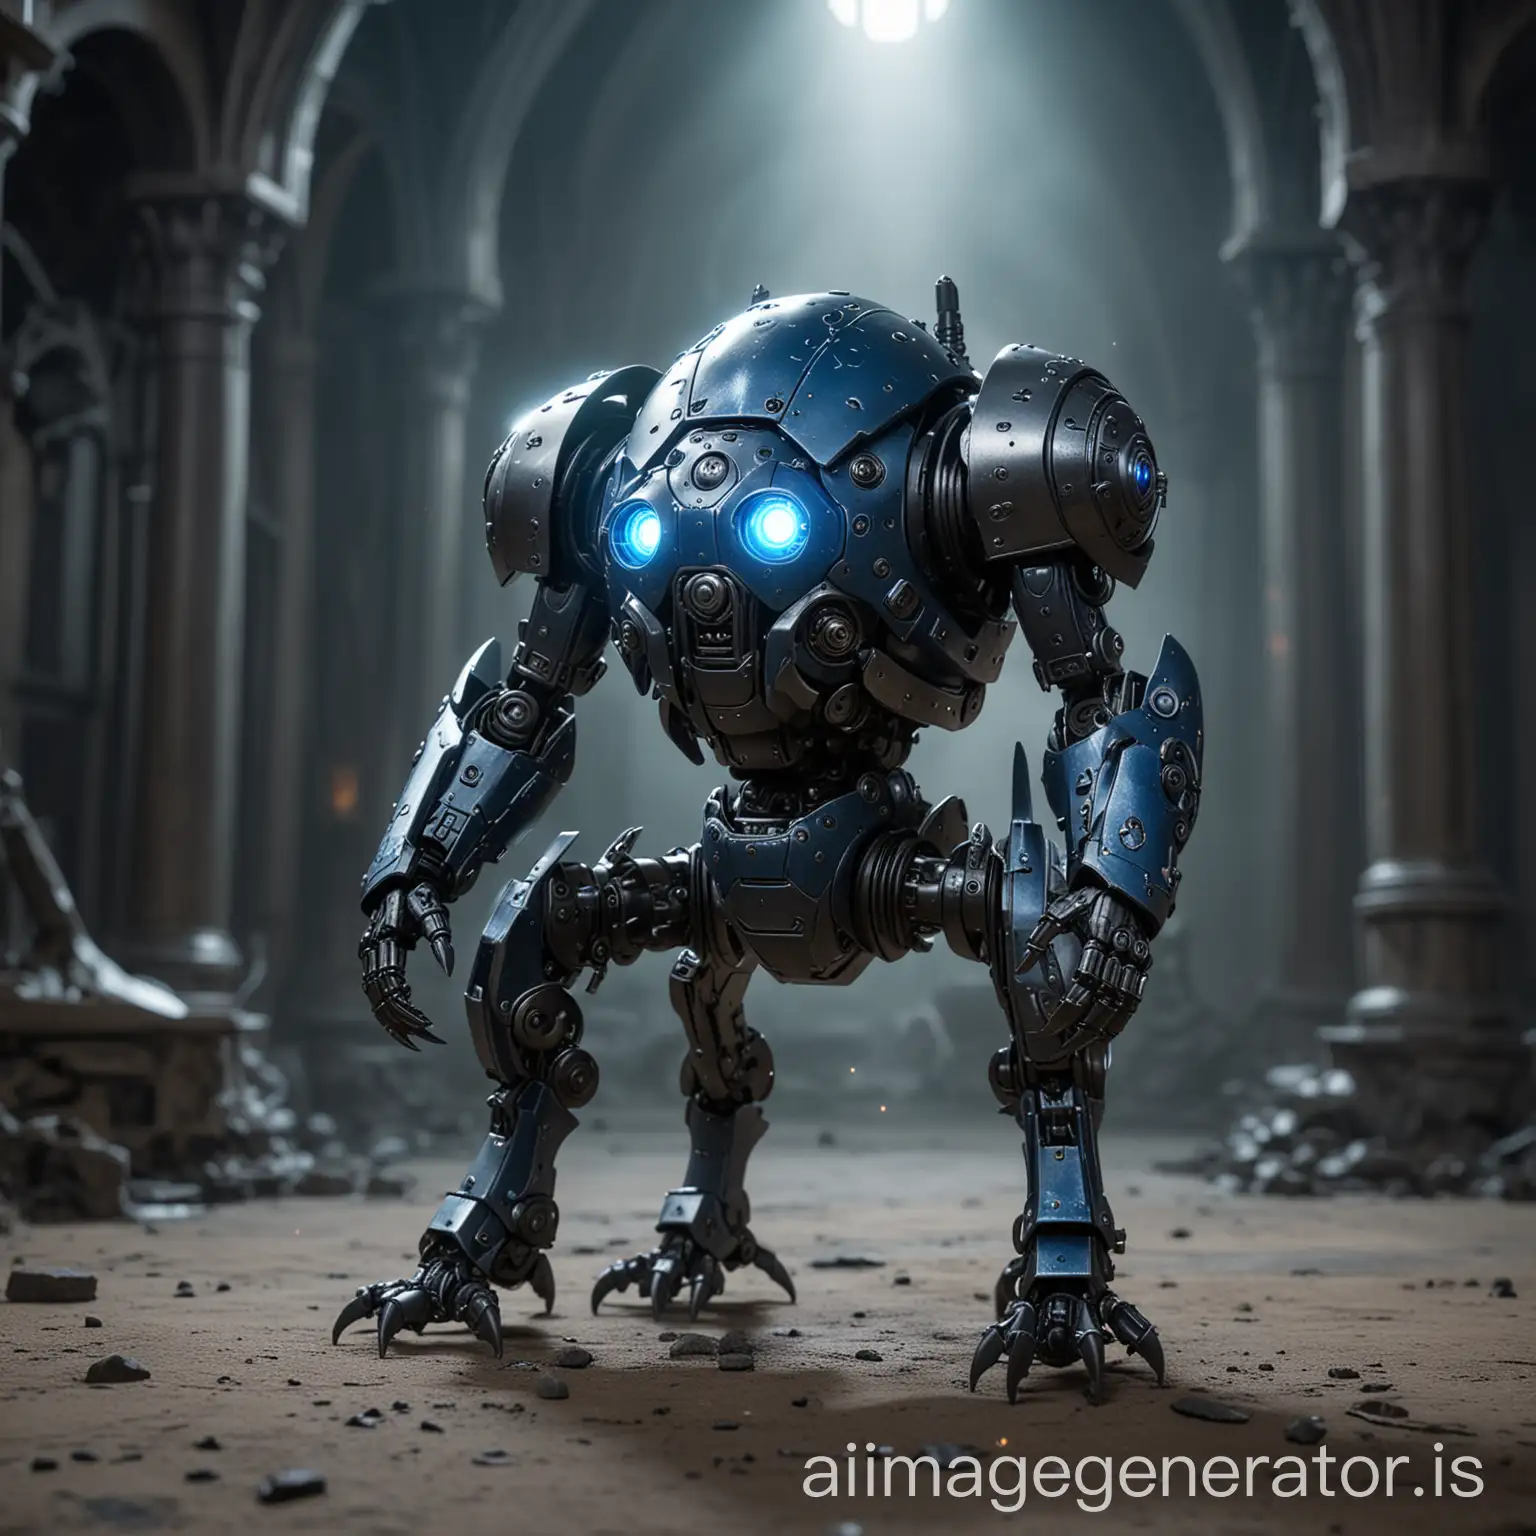 steel Tachikoma with claws and shields legs, standing on 4 legs and glowing with eldritch magic in a dark gothic castle